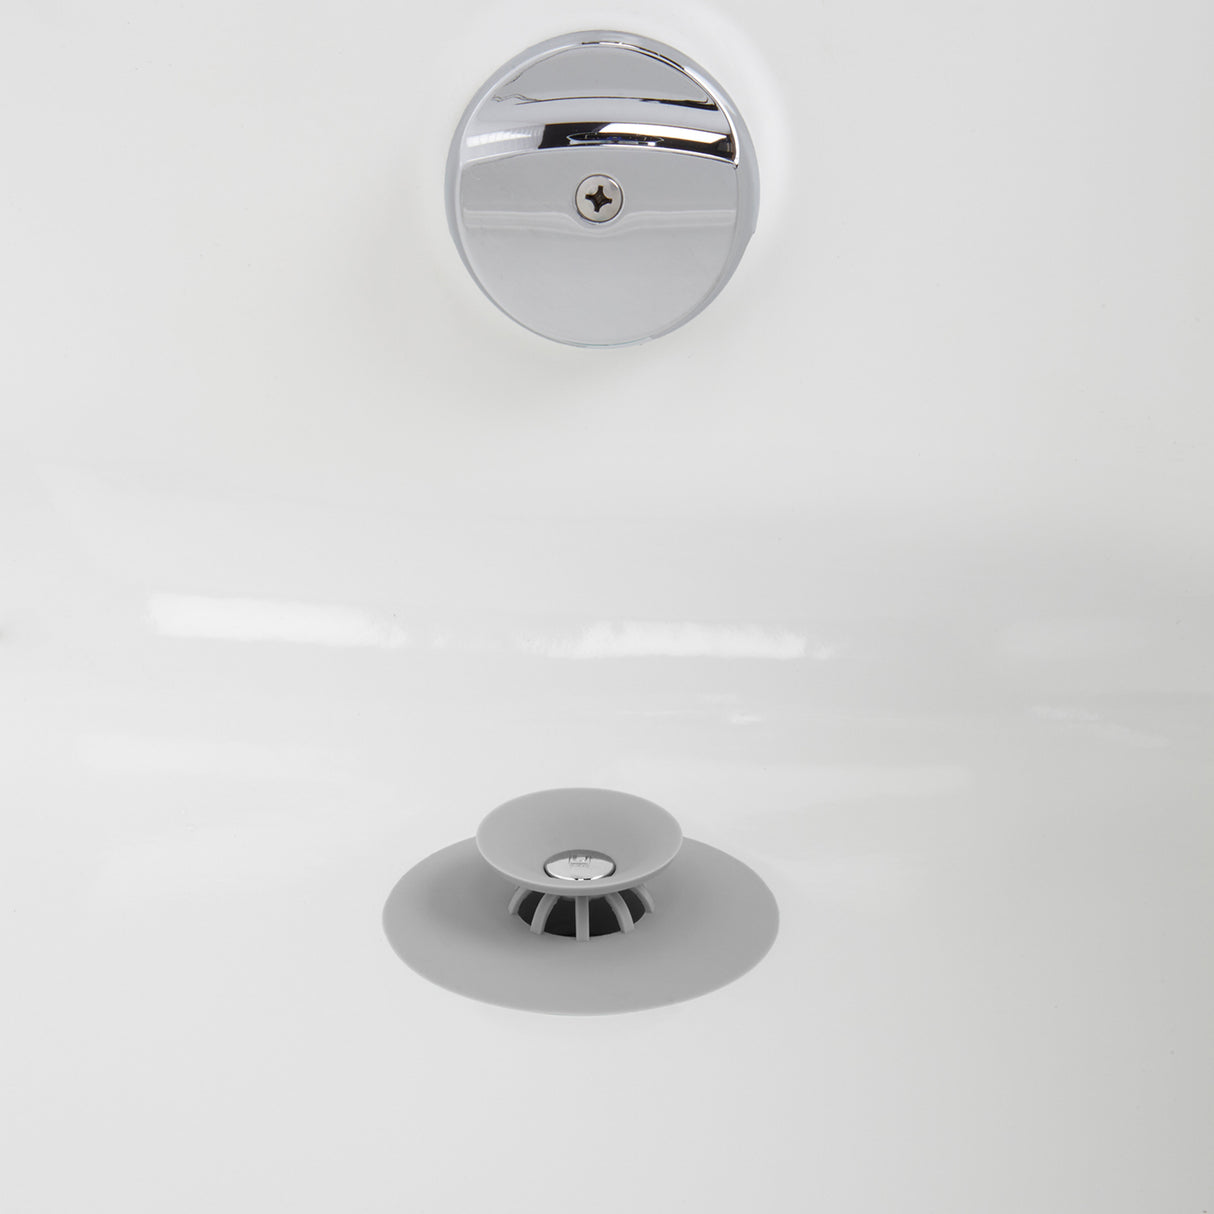 Haftaby Universal Bathtub Stopper with Drain Hair Catcher/Upgraded